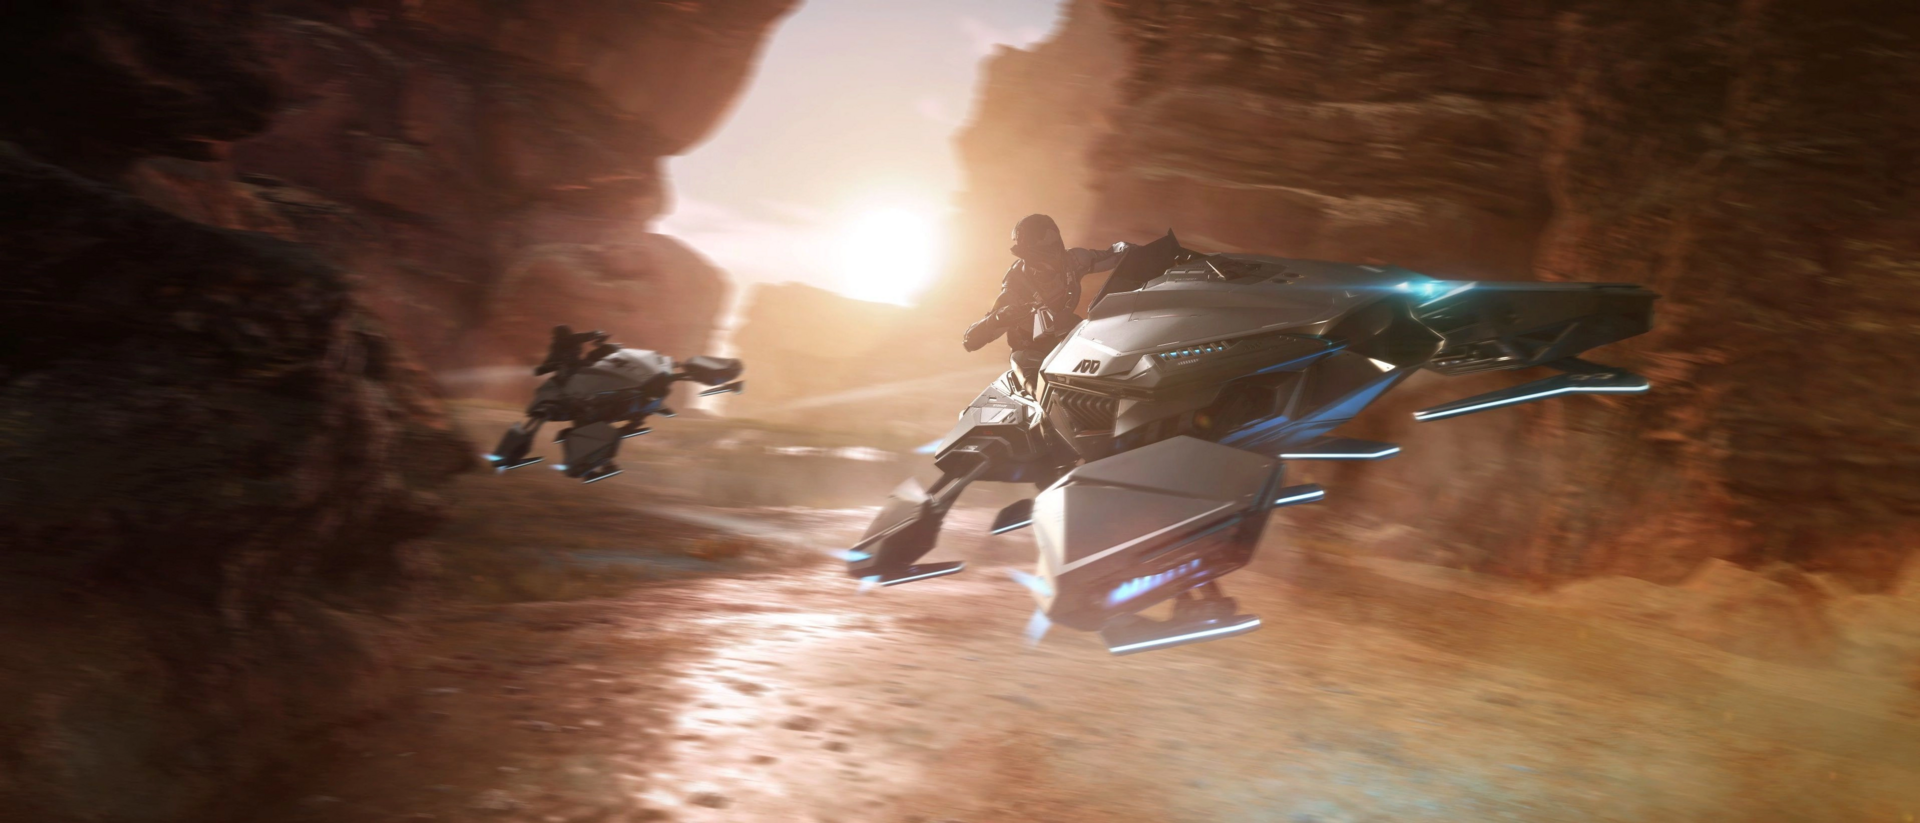 https://starcitizen.tools/images/thumb/3/32/HoverQuad_%28x2%29_flying_through_narrow_Canyon.png/1920px-HoverQuad_%28x2%29_flying_through_narrow_Canyon.png